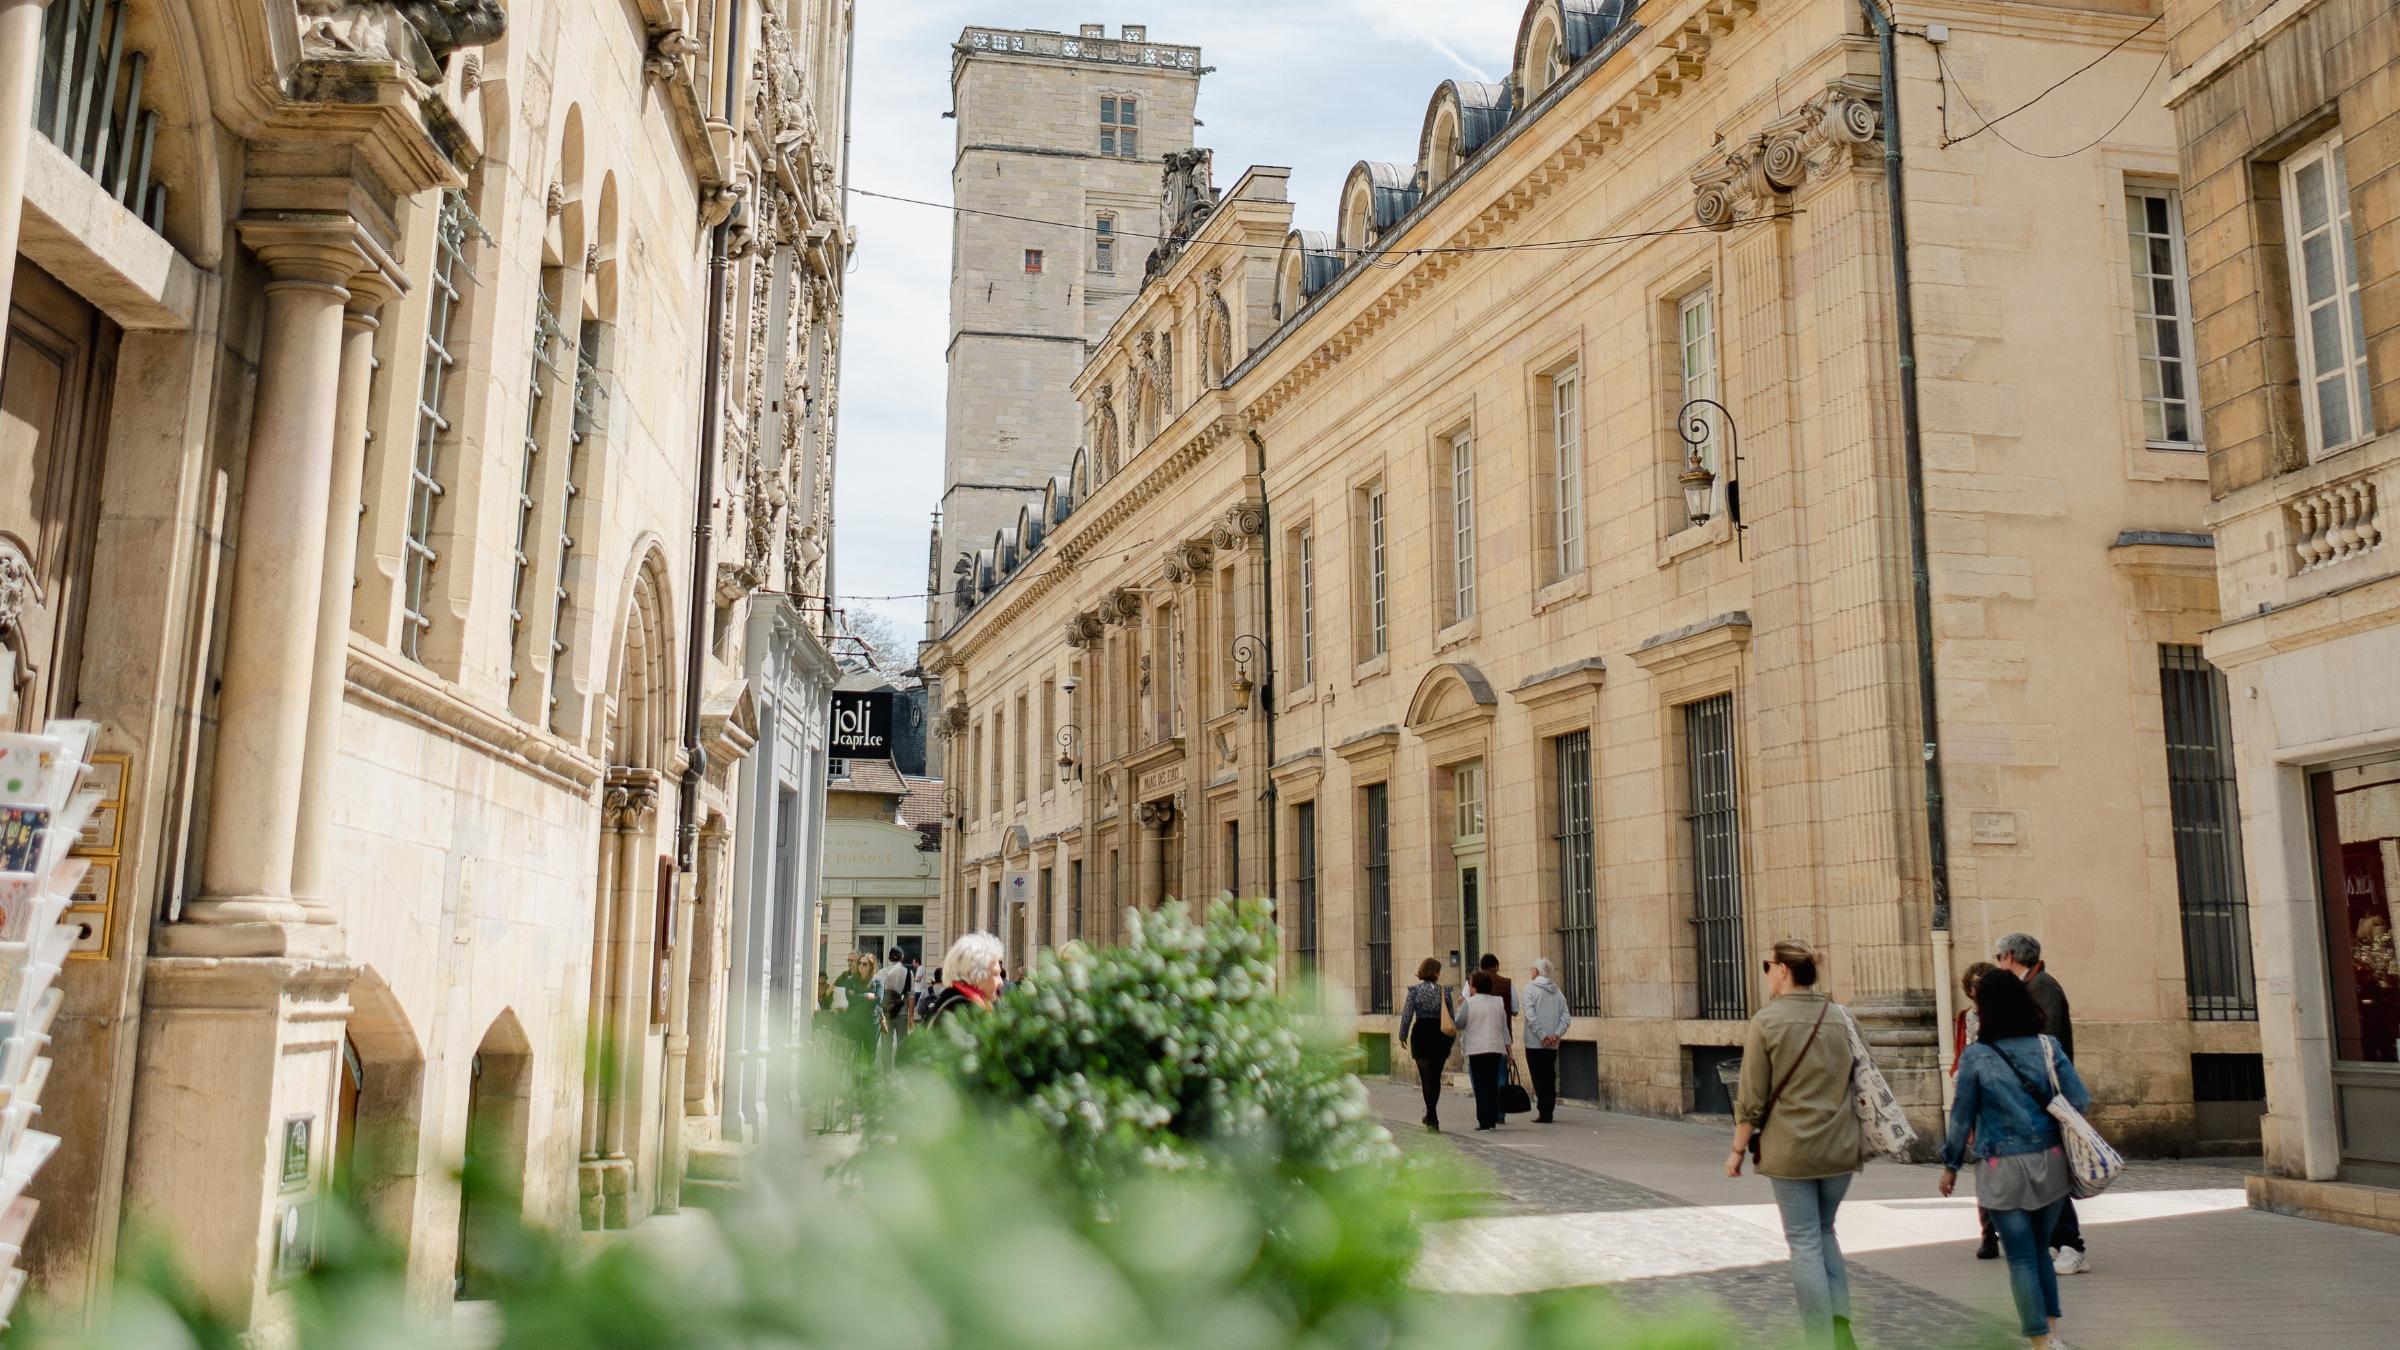 Dijon: The Thrilling City for Students with Top Health Offer and Enviable Air Quality